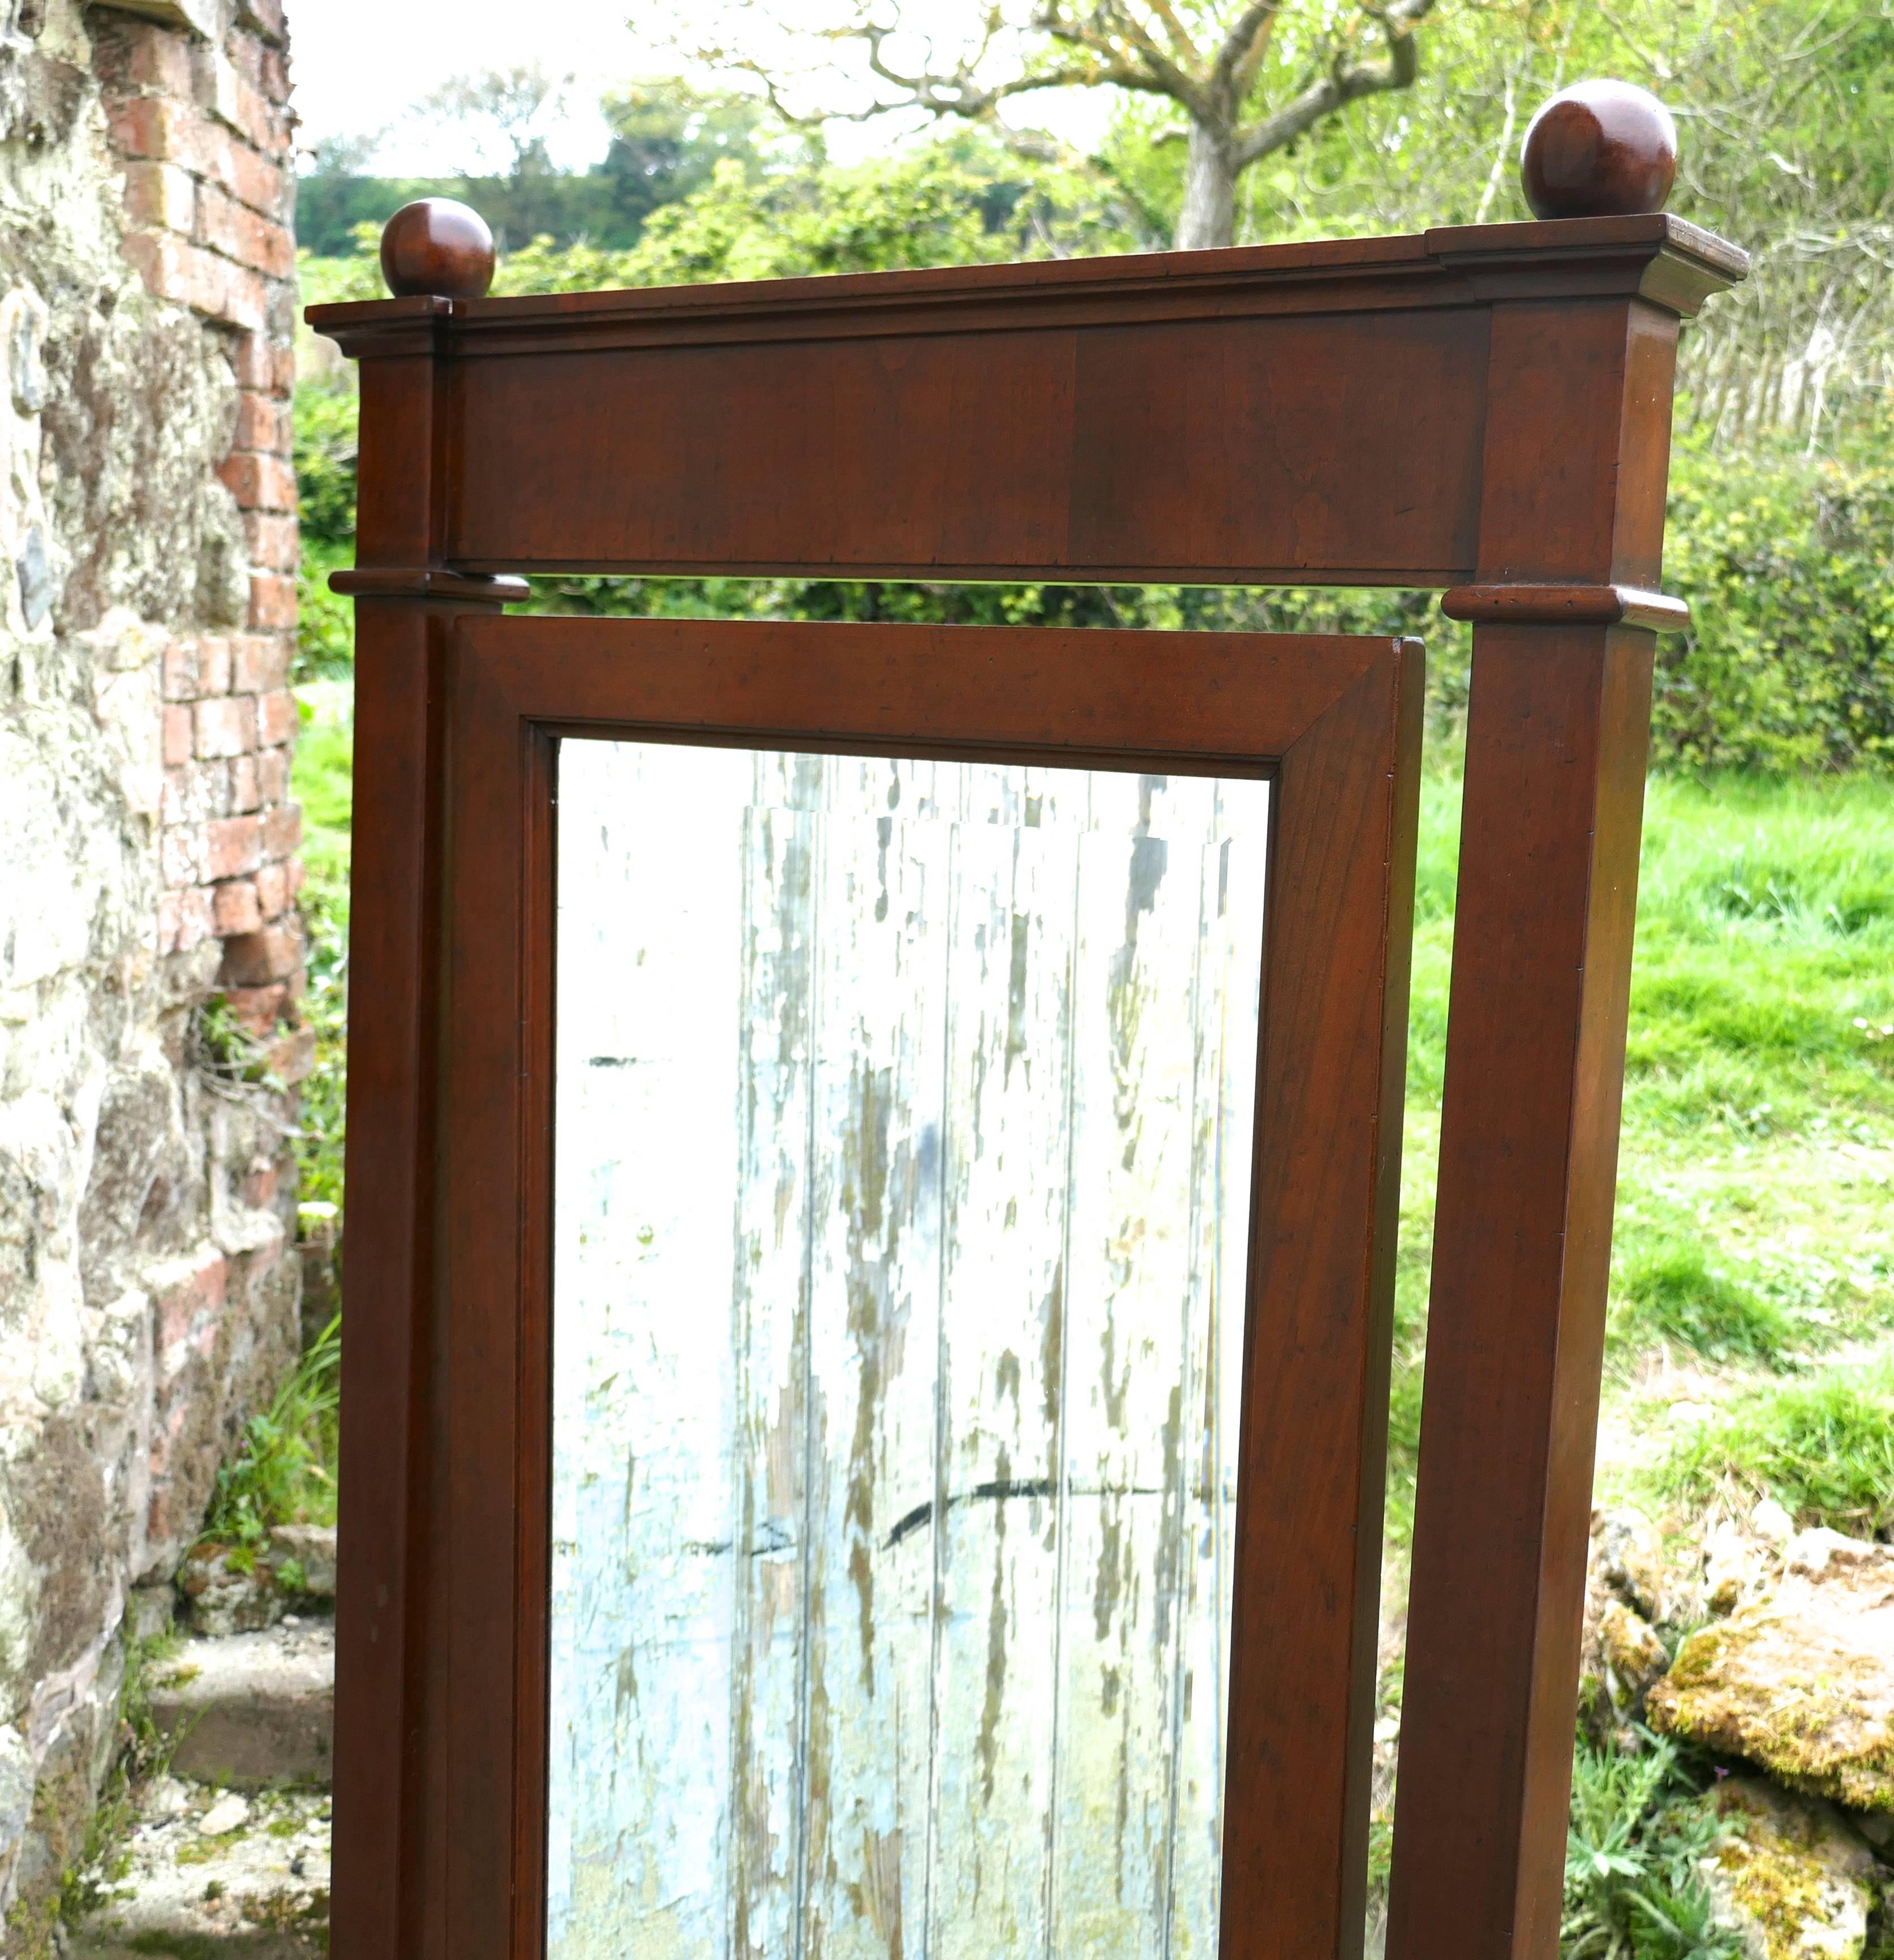 A large 19th century walnut cheval mirror, gentlemans outfitter

This is a large walnut cheval mirror dating from about 1890
The mirror has a solid walnut frame, it is rectangular in shape, it sits firmly in its stand and swivels for maximum